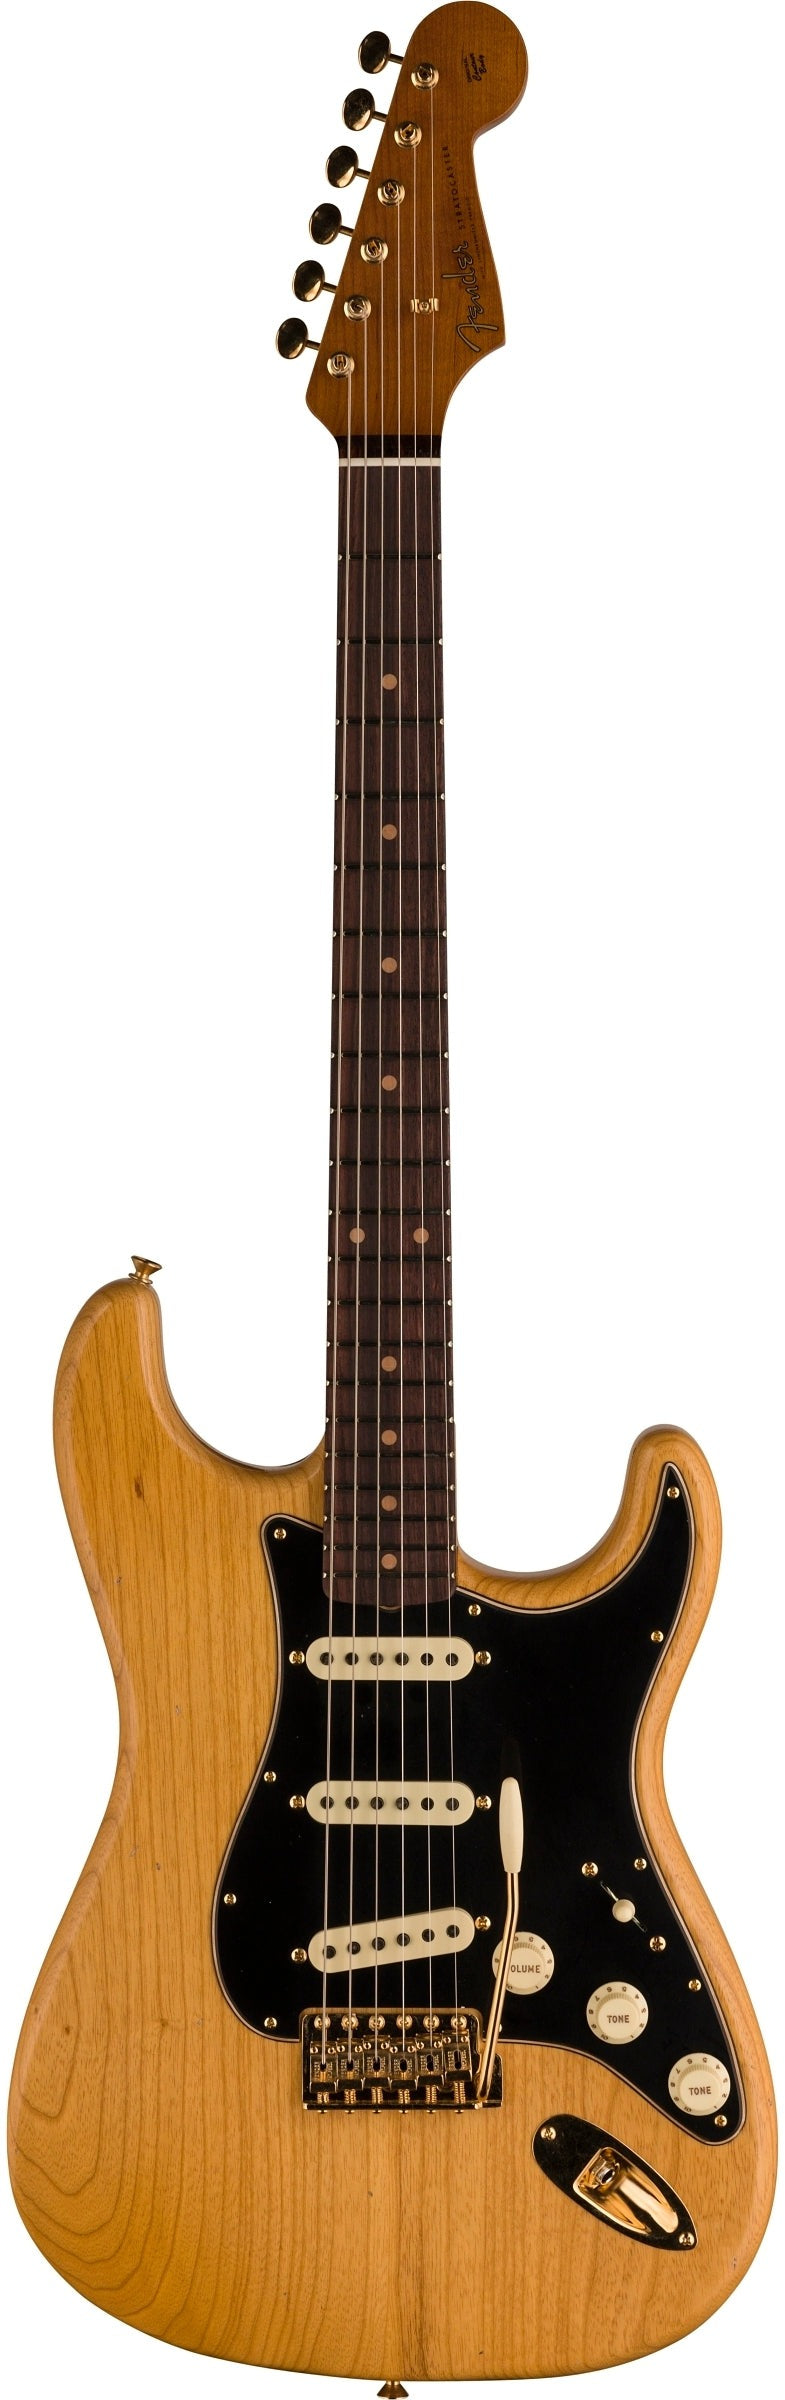 FENDER LIMITED EDITION CUSTOM '62 STRAT® - JOURNEYMAN RELIC® WITH GOLD CLOSET CLASSIC HARDWARE, AGED NATURAL